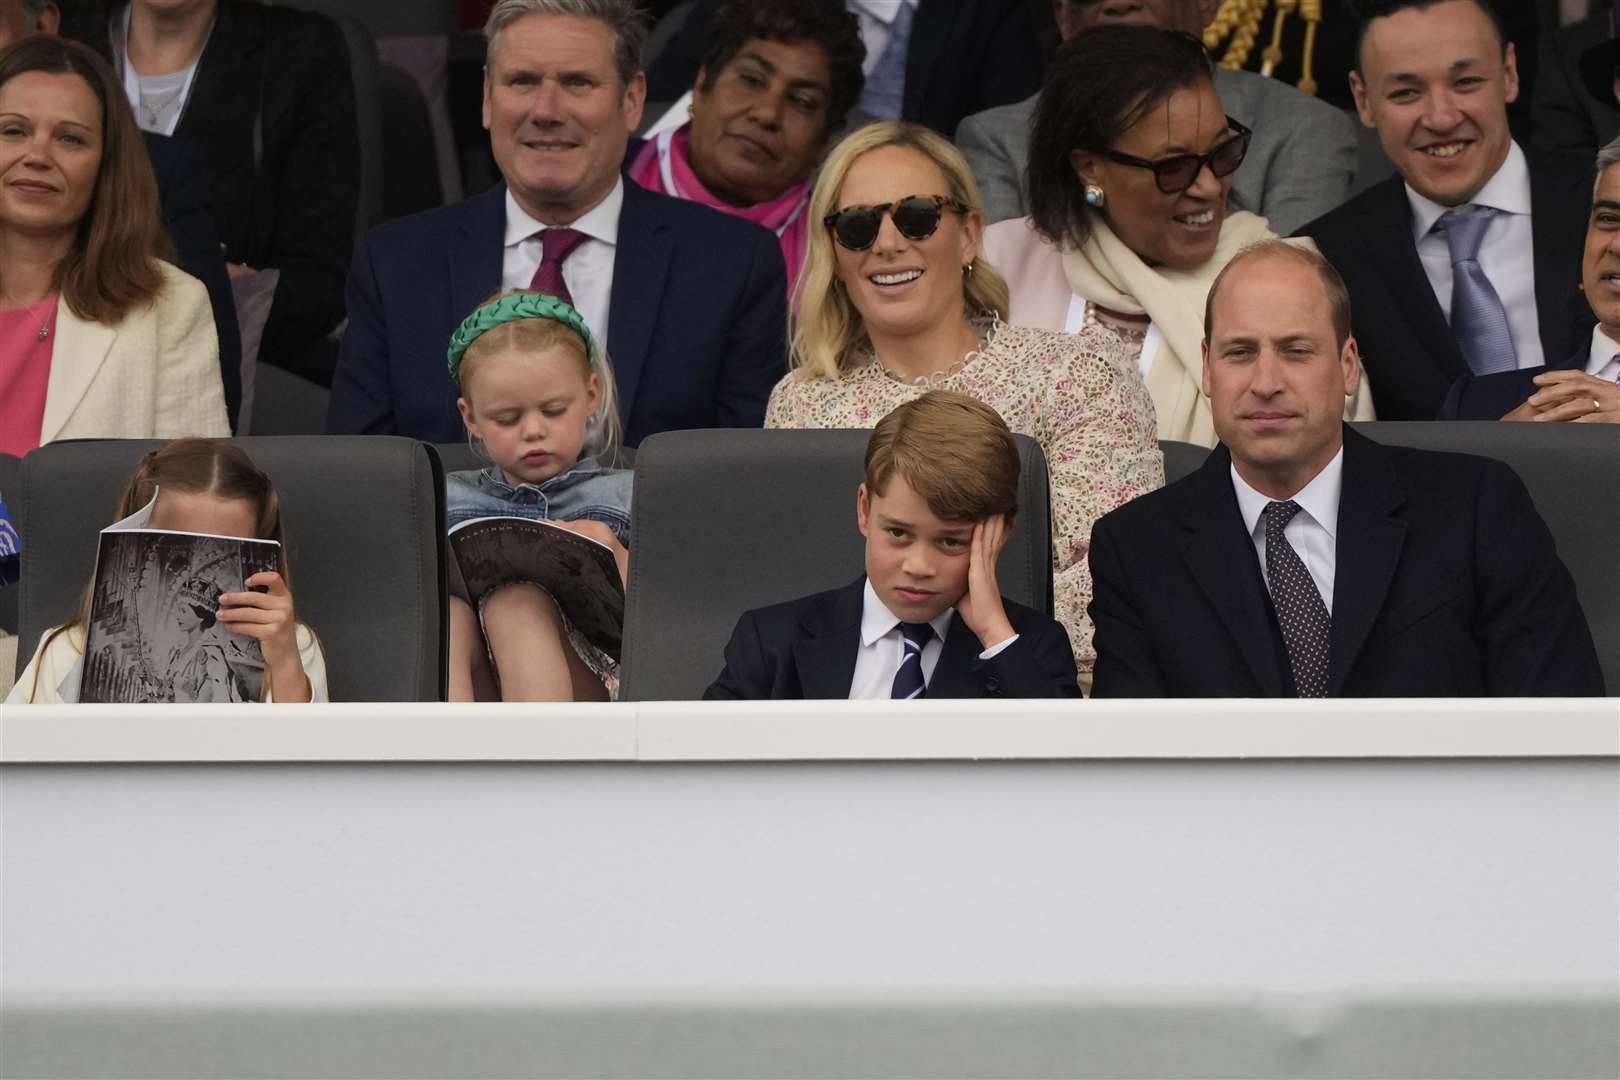 George watching the spectacle (Frank Augstein/PA)